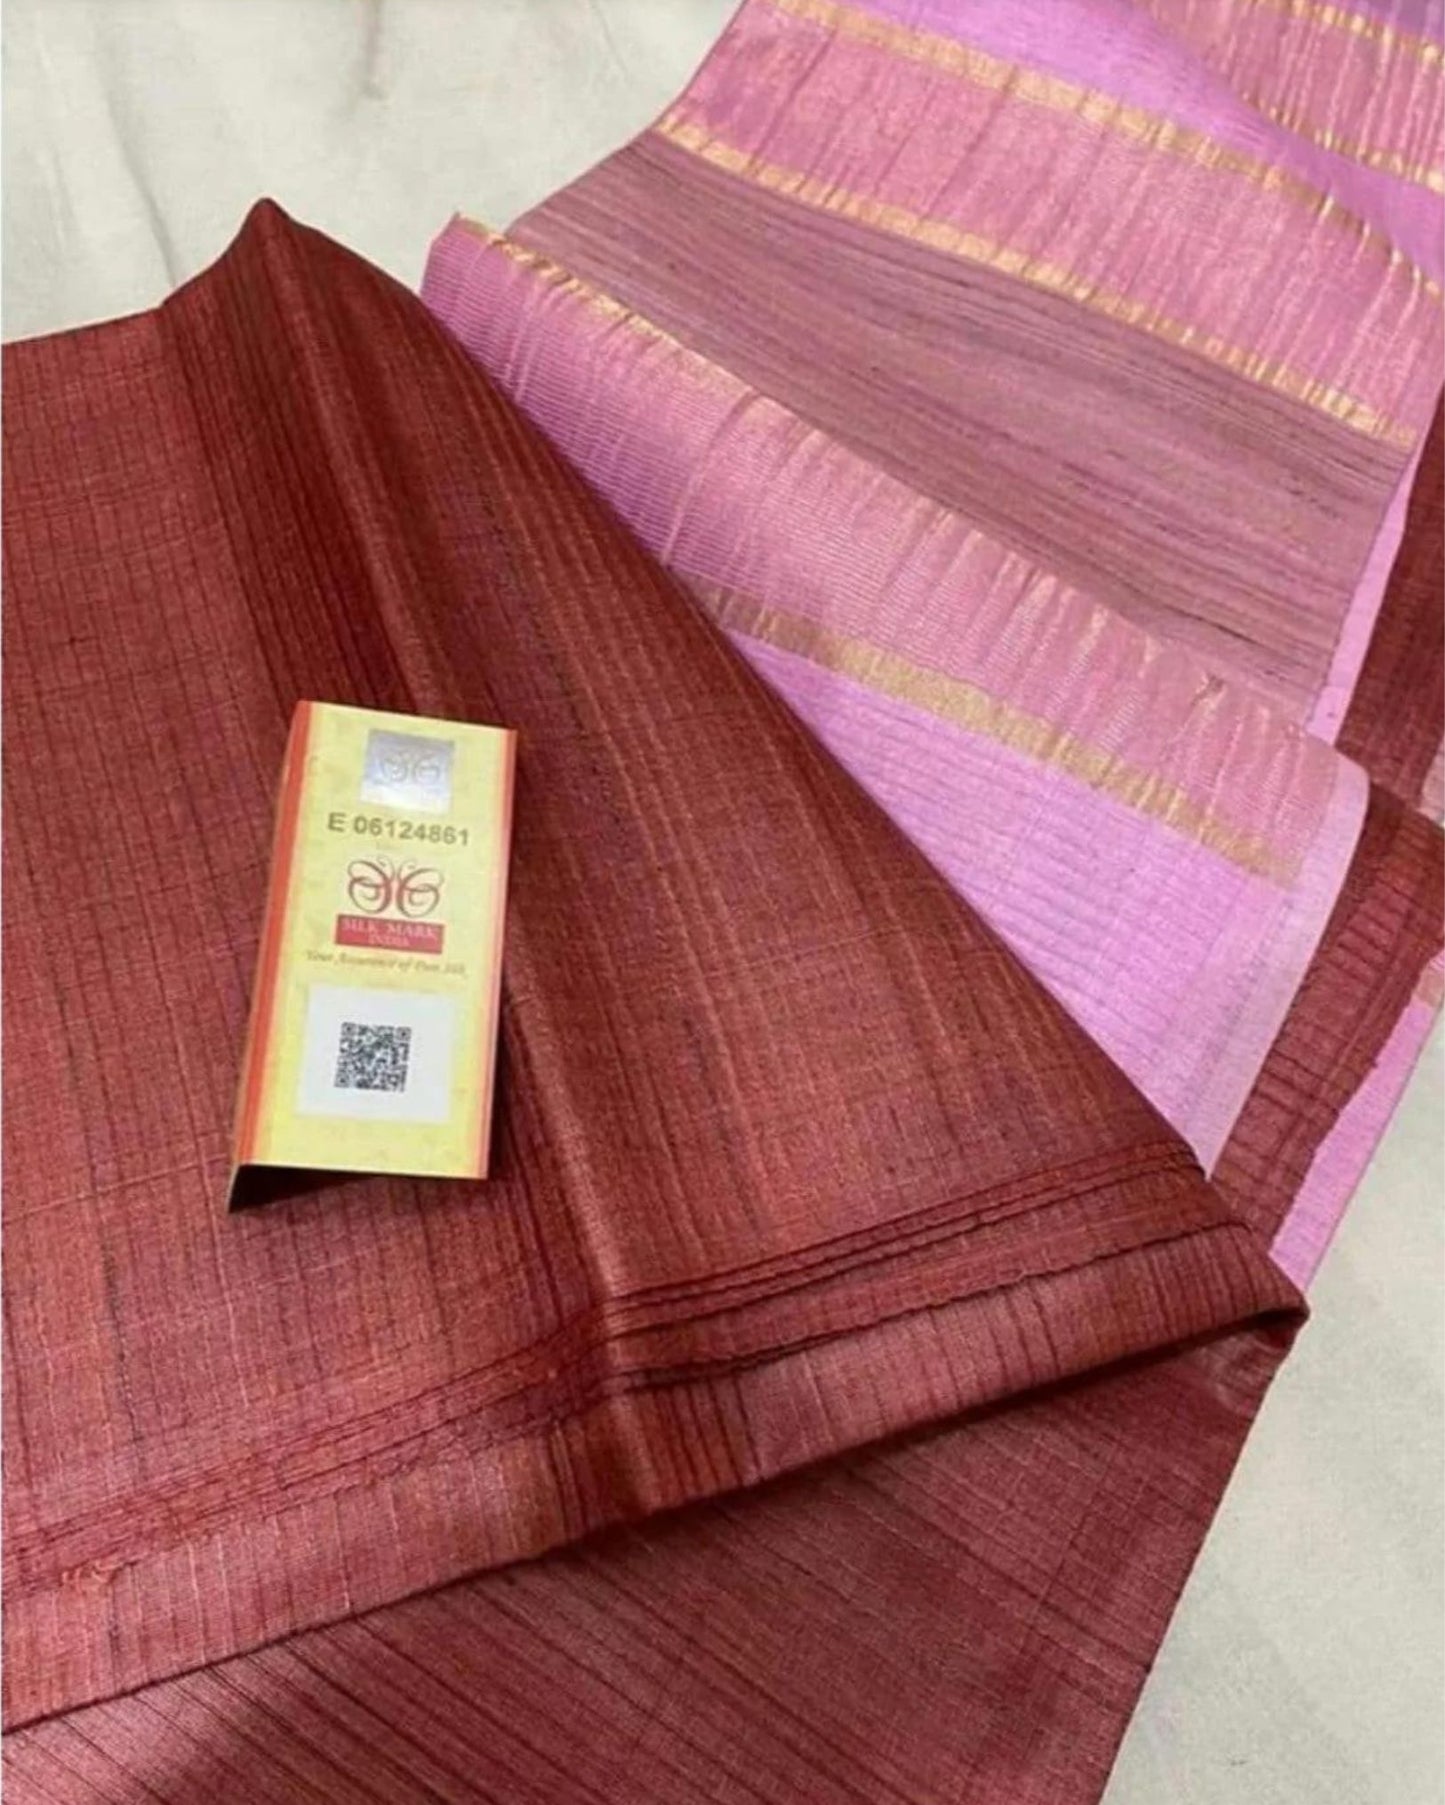 4573-Silkmark Certified Eri Silk with Gichcha Tussar Stripes Hand Dyed maroon Saree with Blouse